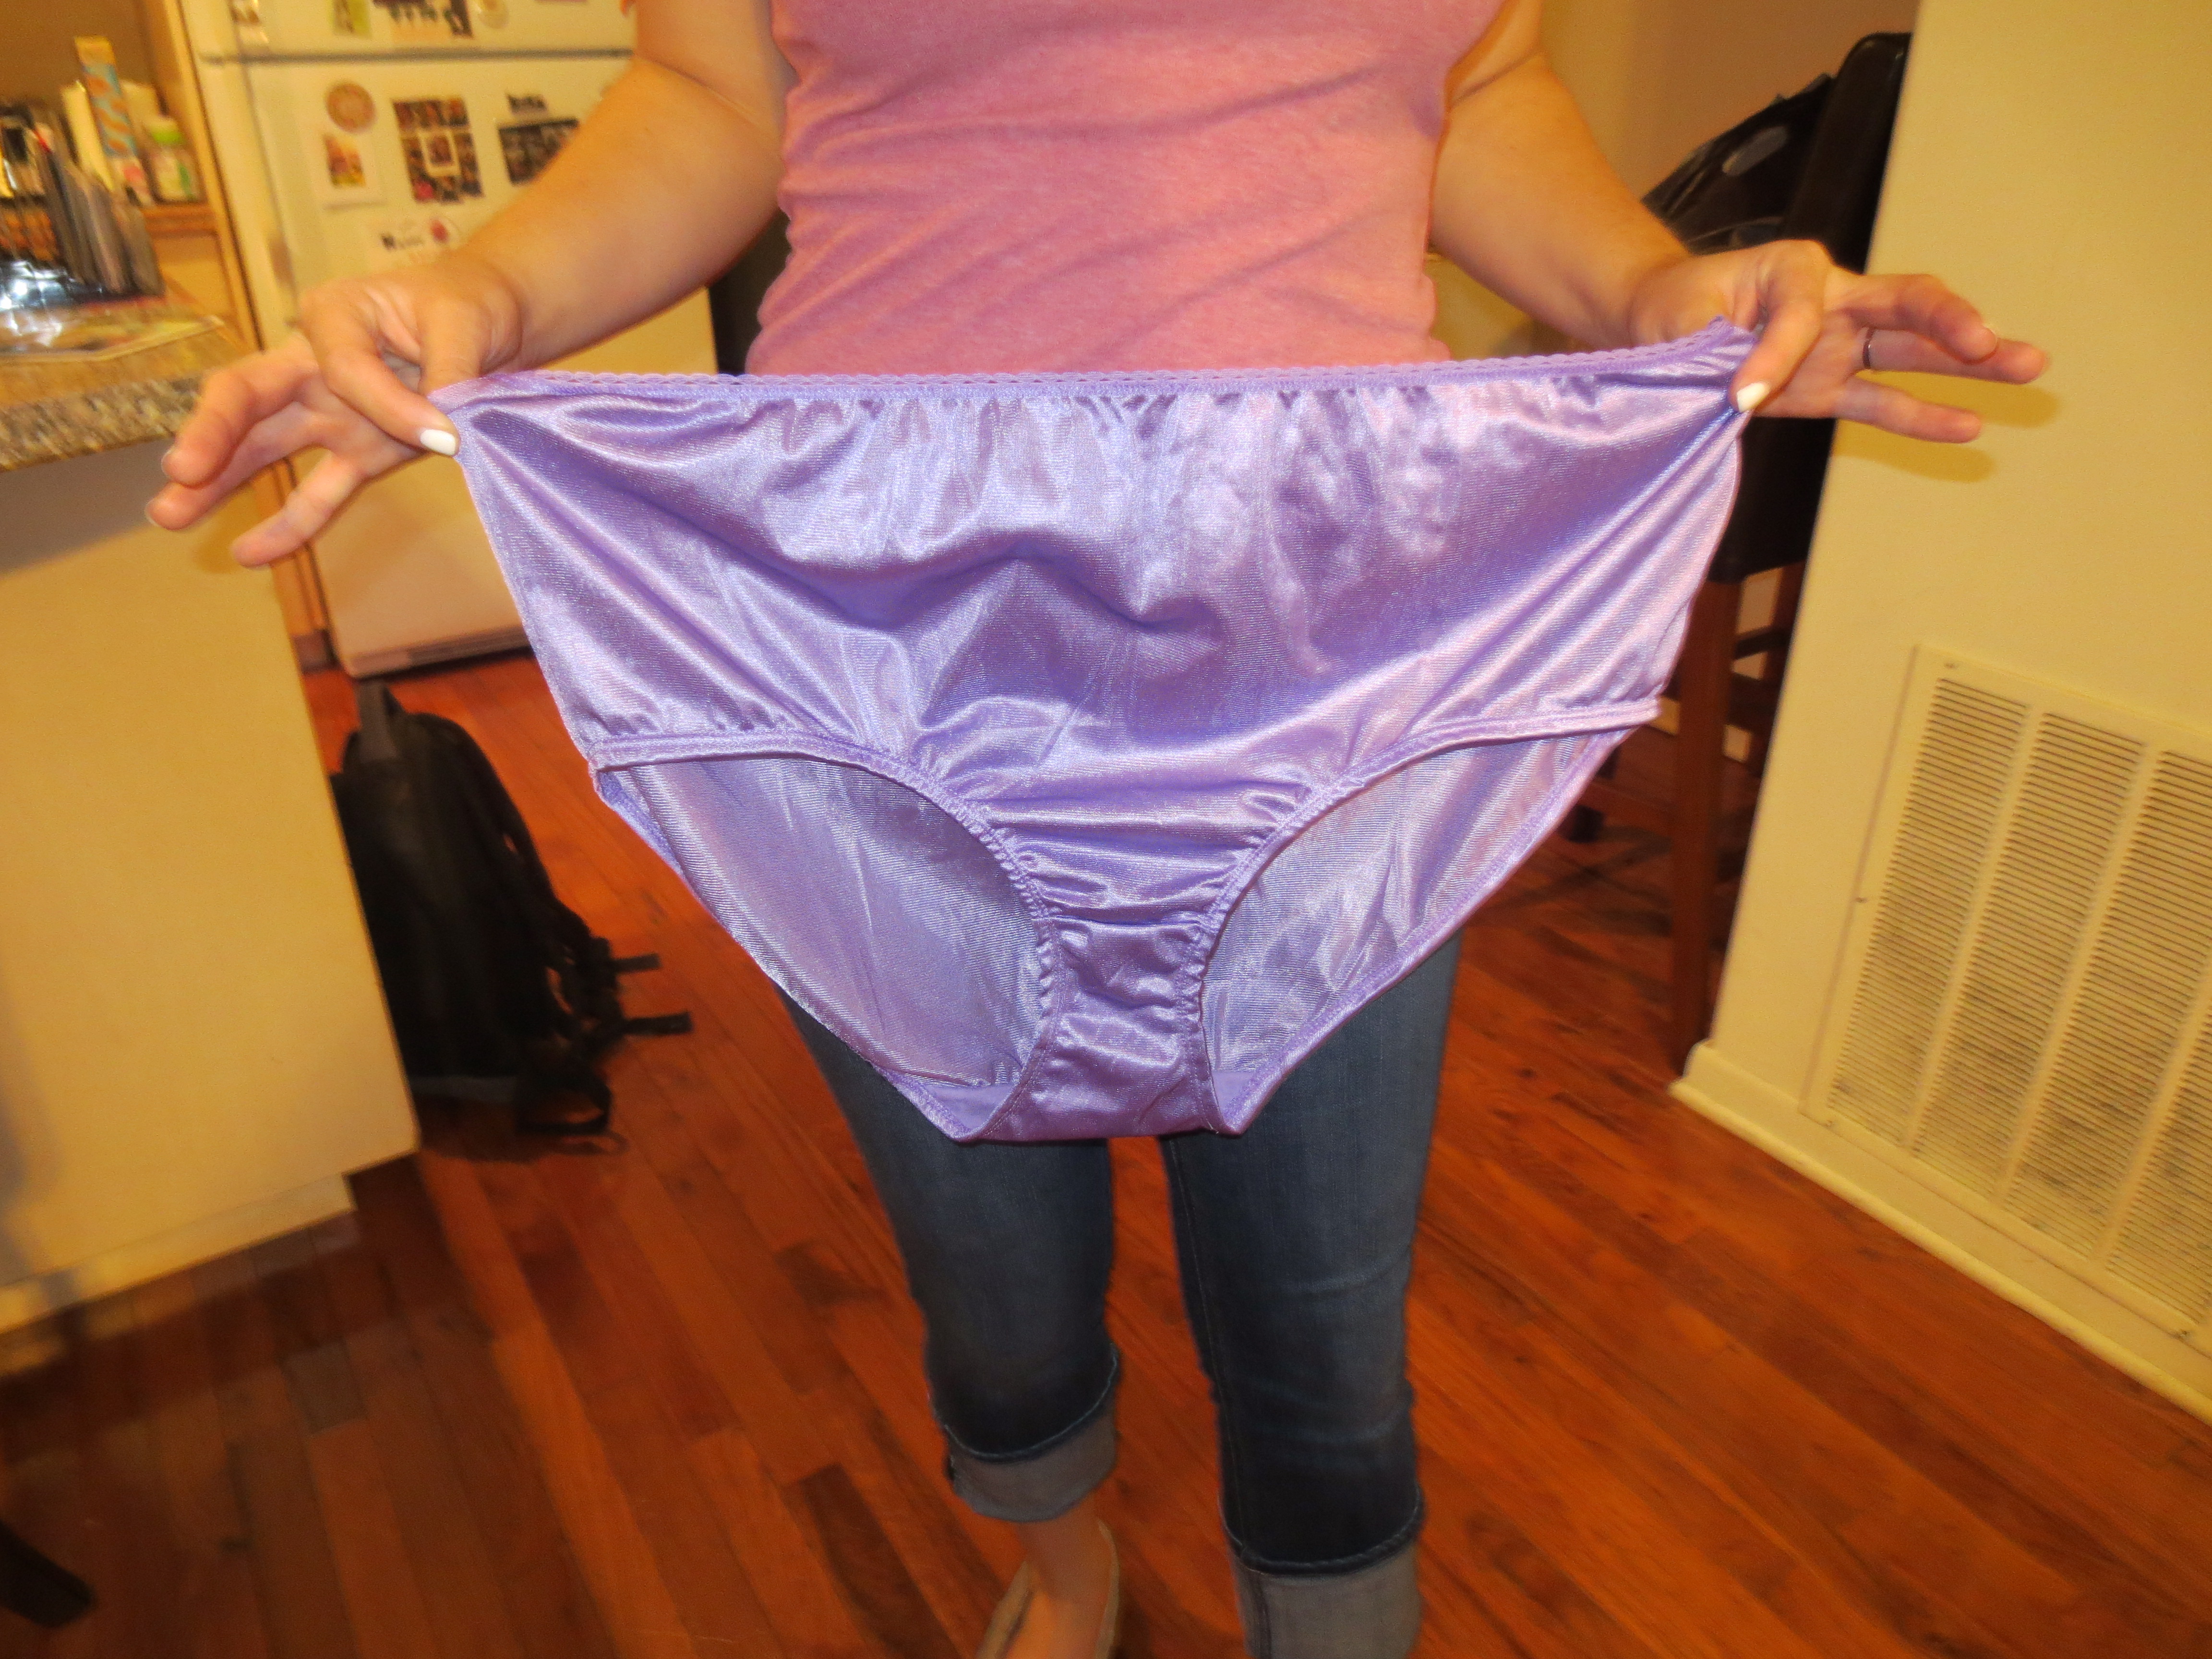 I wear panties from Lane Bryant. on 10/18/18 at 7:26 pm to. 